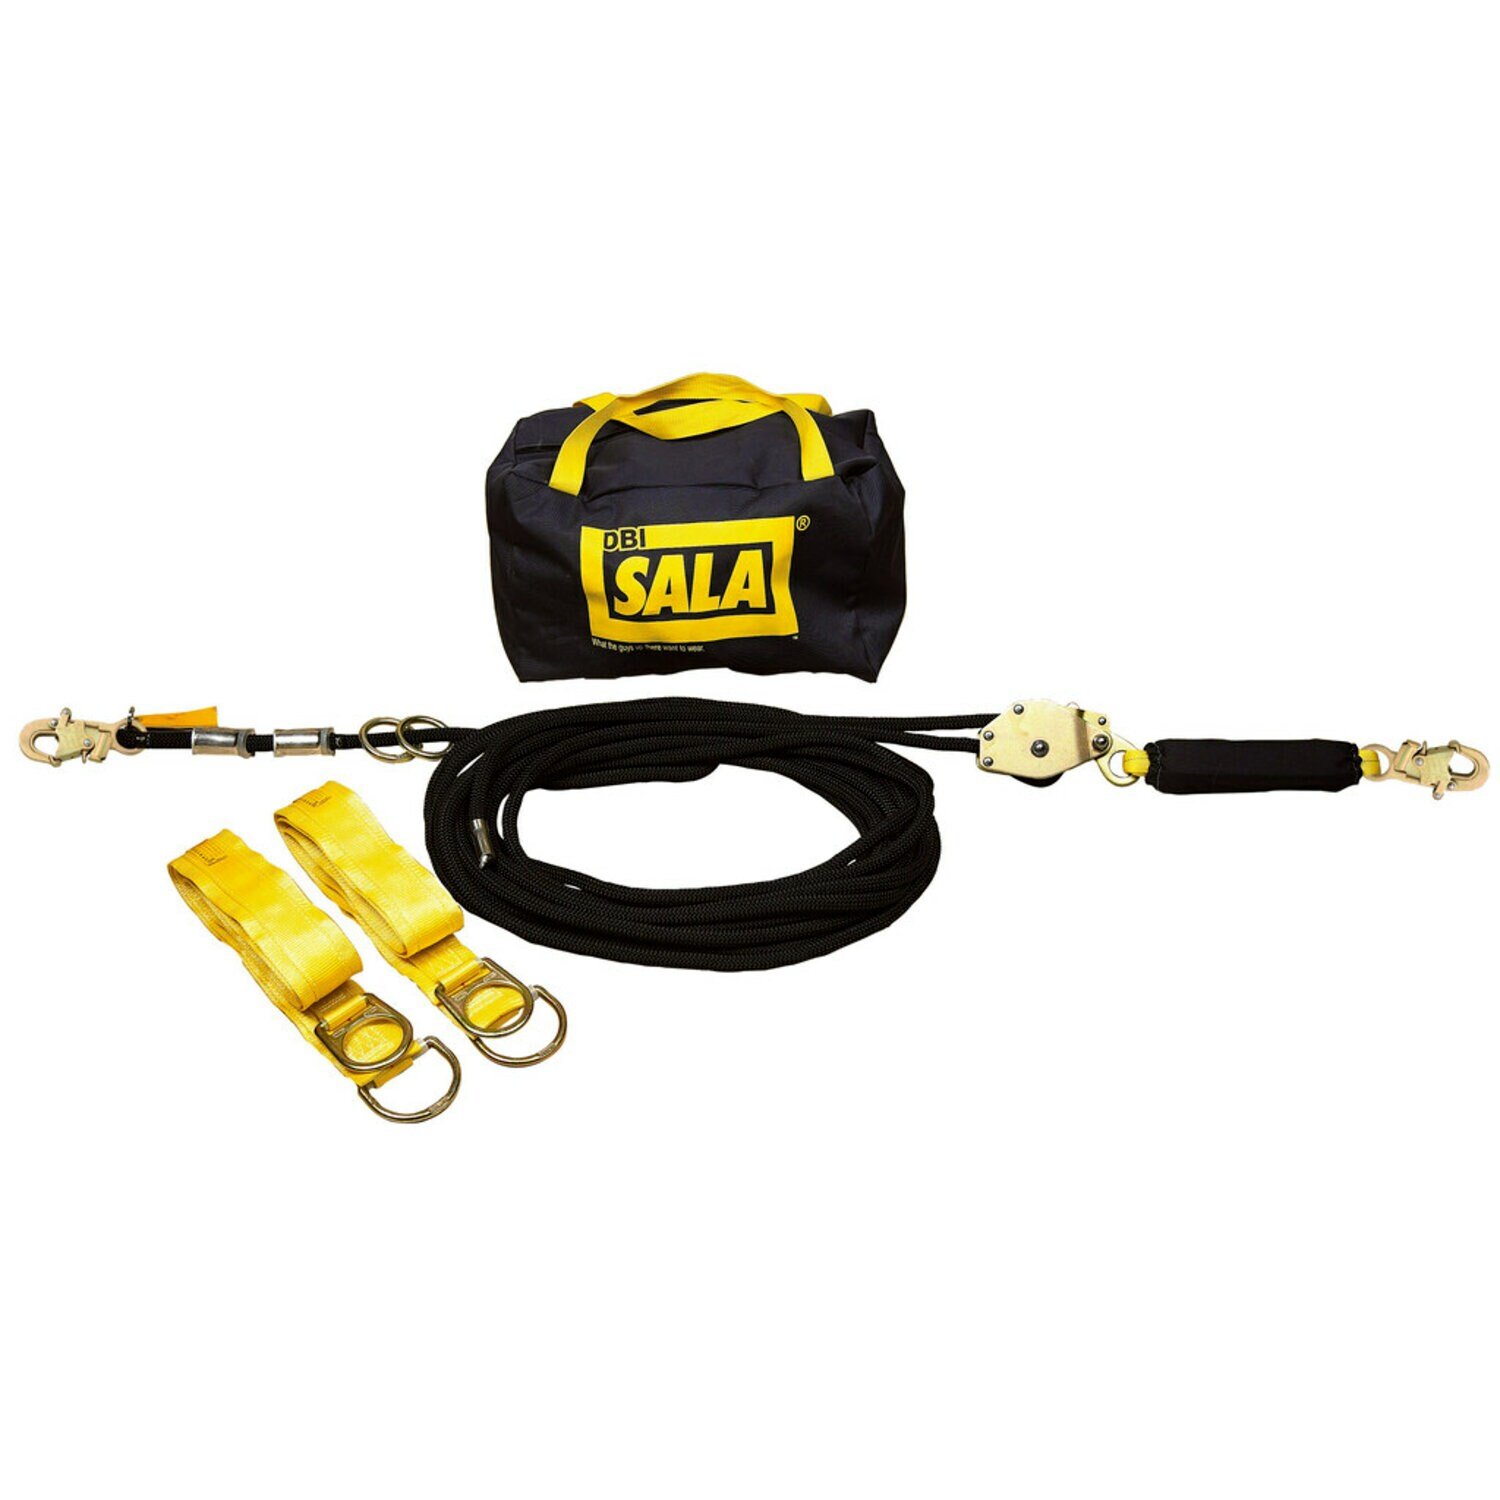 7012820309 - 3M DBI-SALA Temporary Horizontal Lifeline System with Anchors 7600707, 11/16 in Nylon Kernmantle Rope, 80 ft